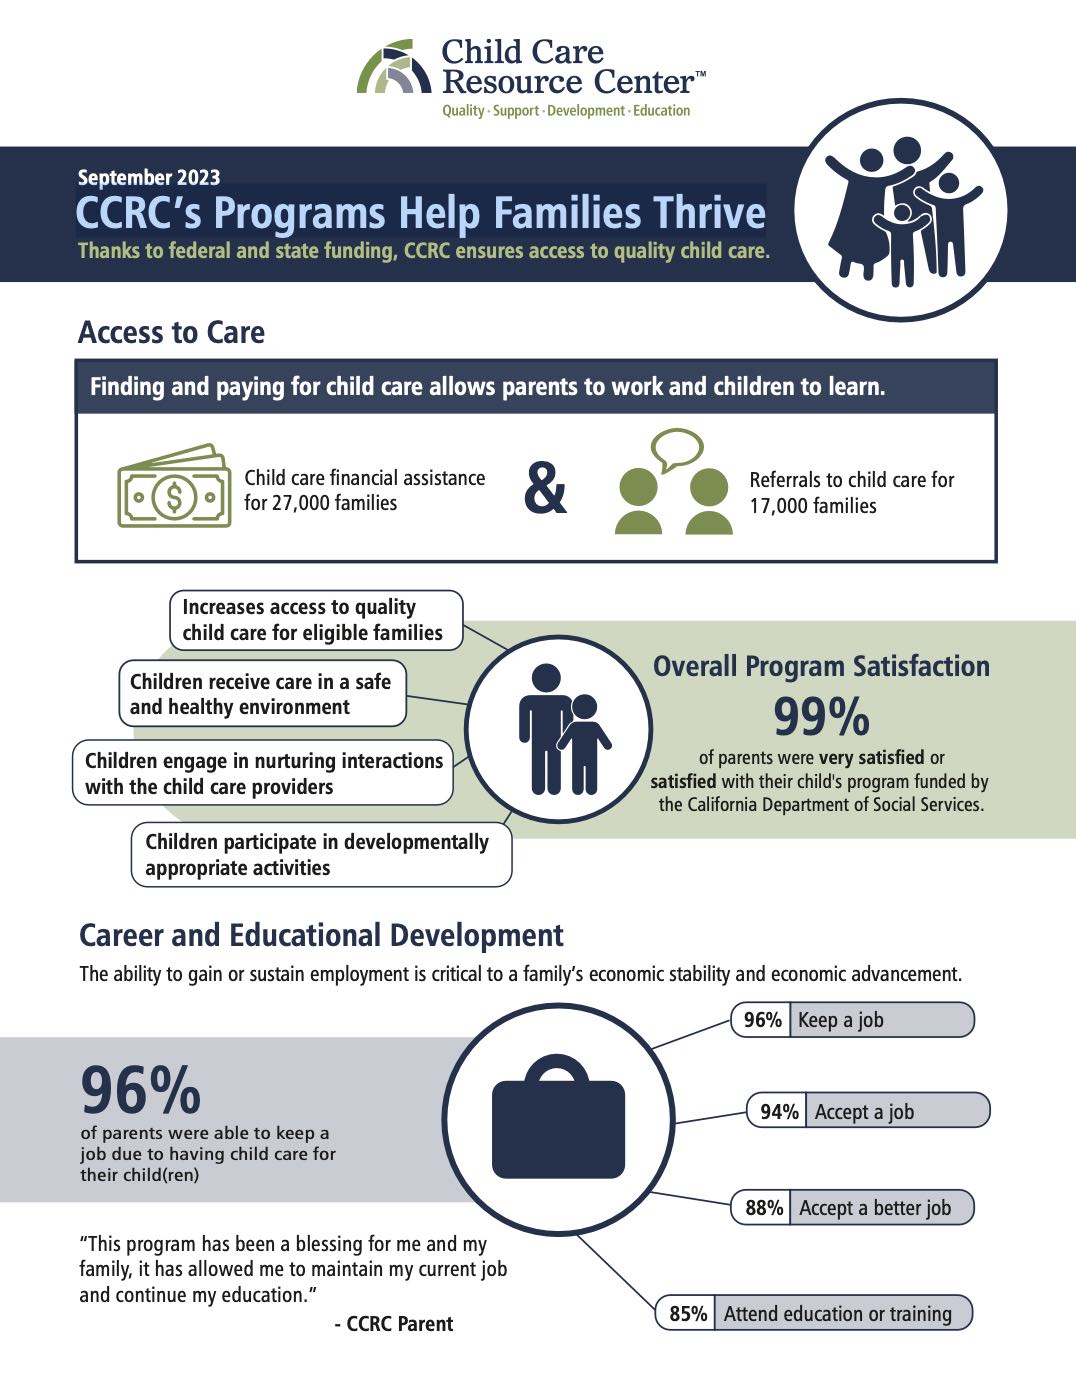 CCRC's Programs Help Families Thrive